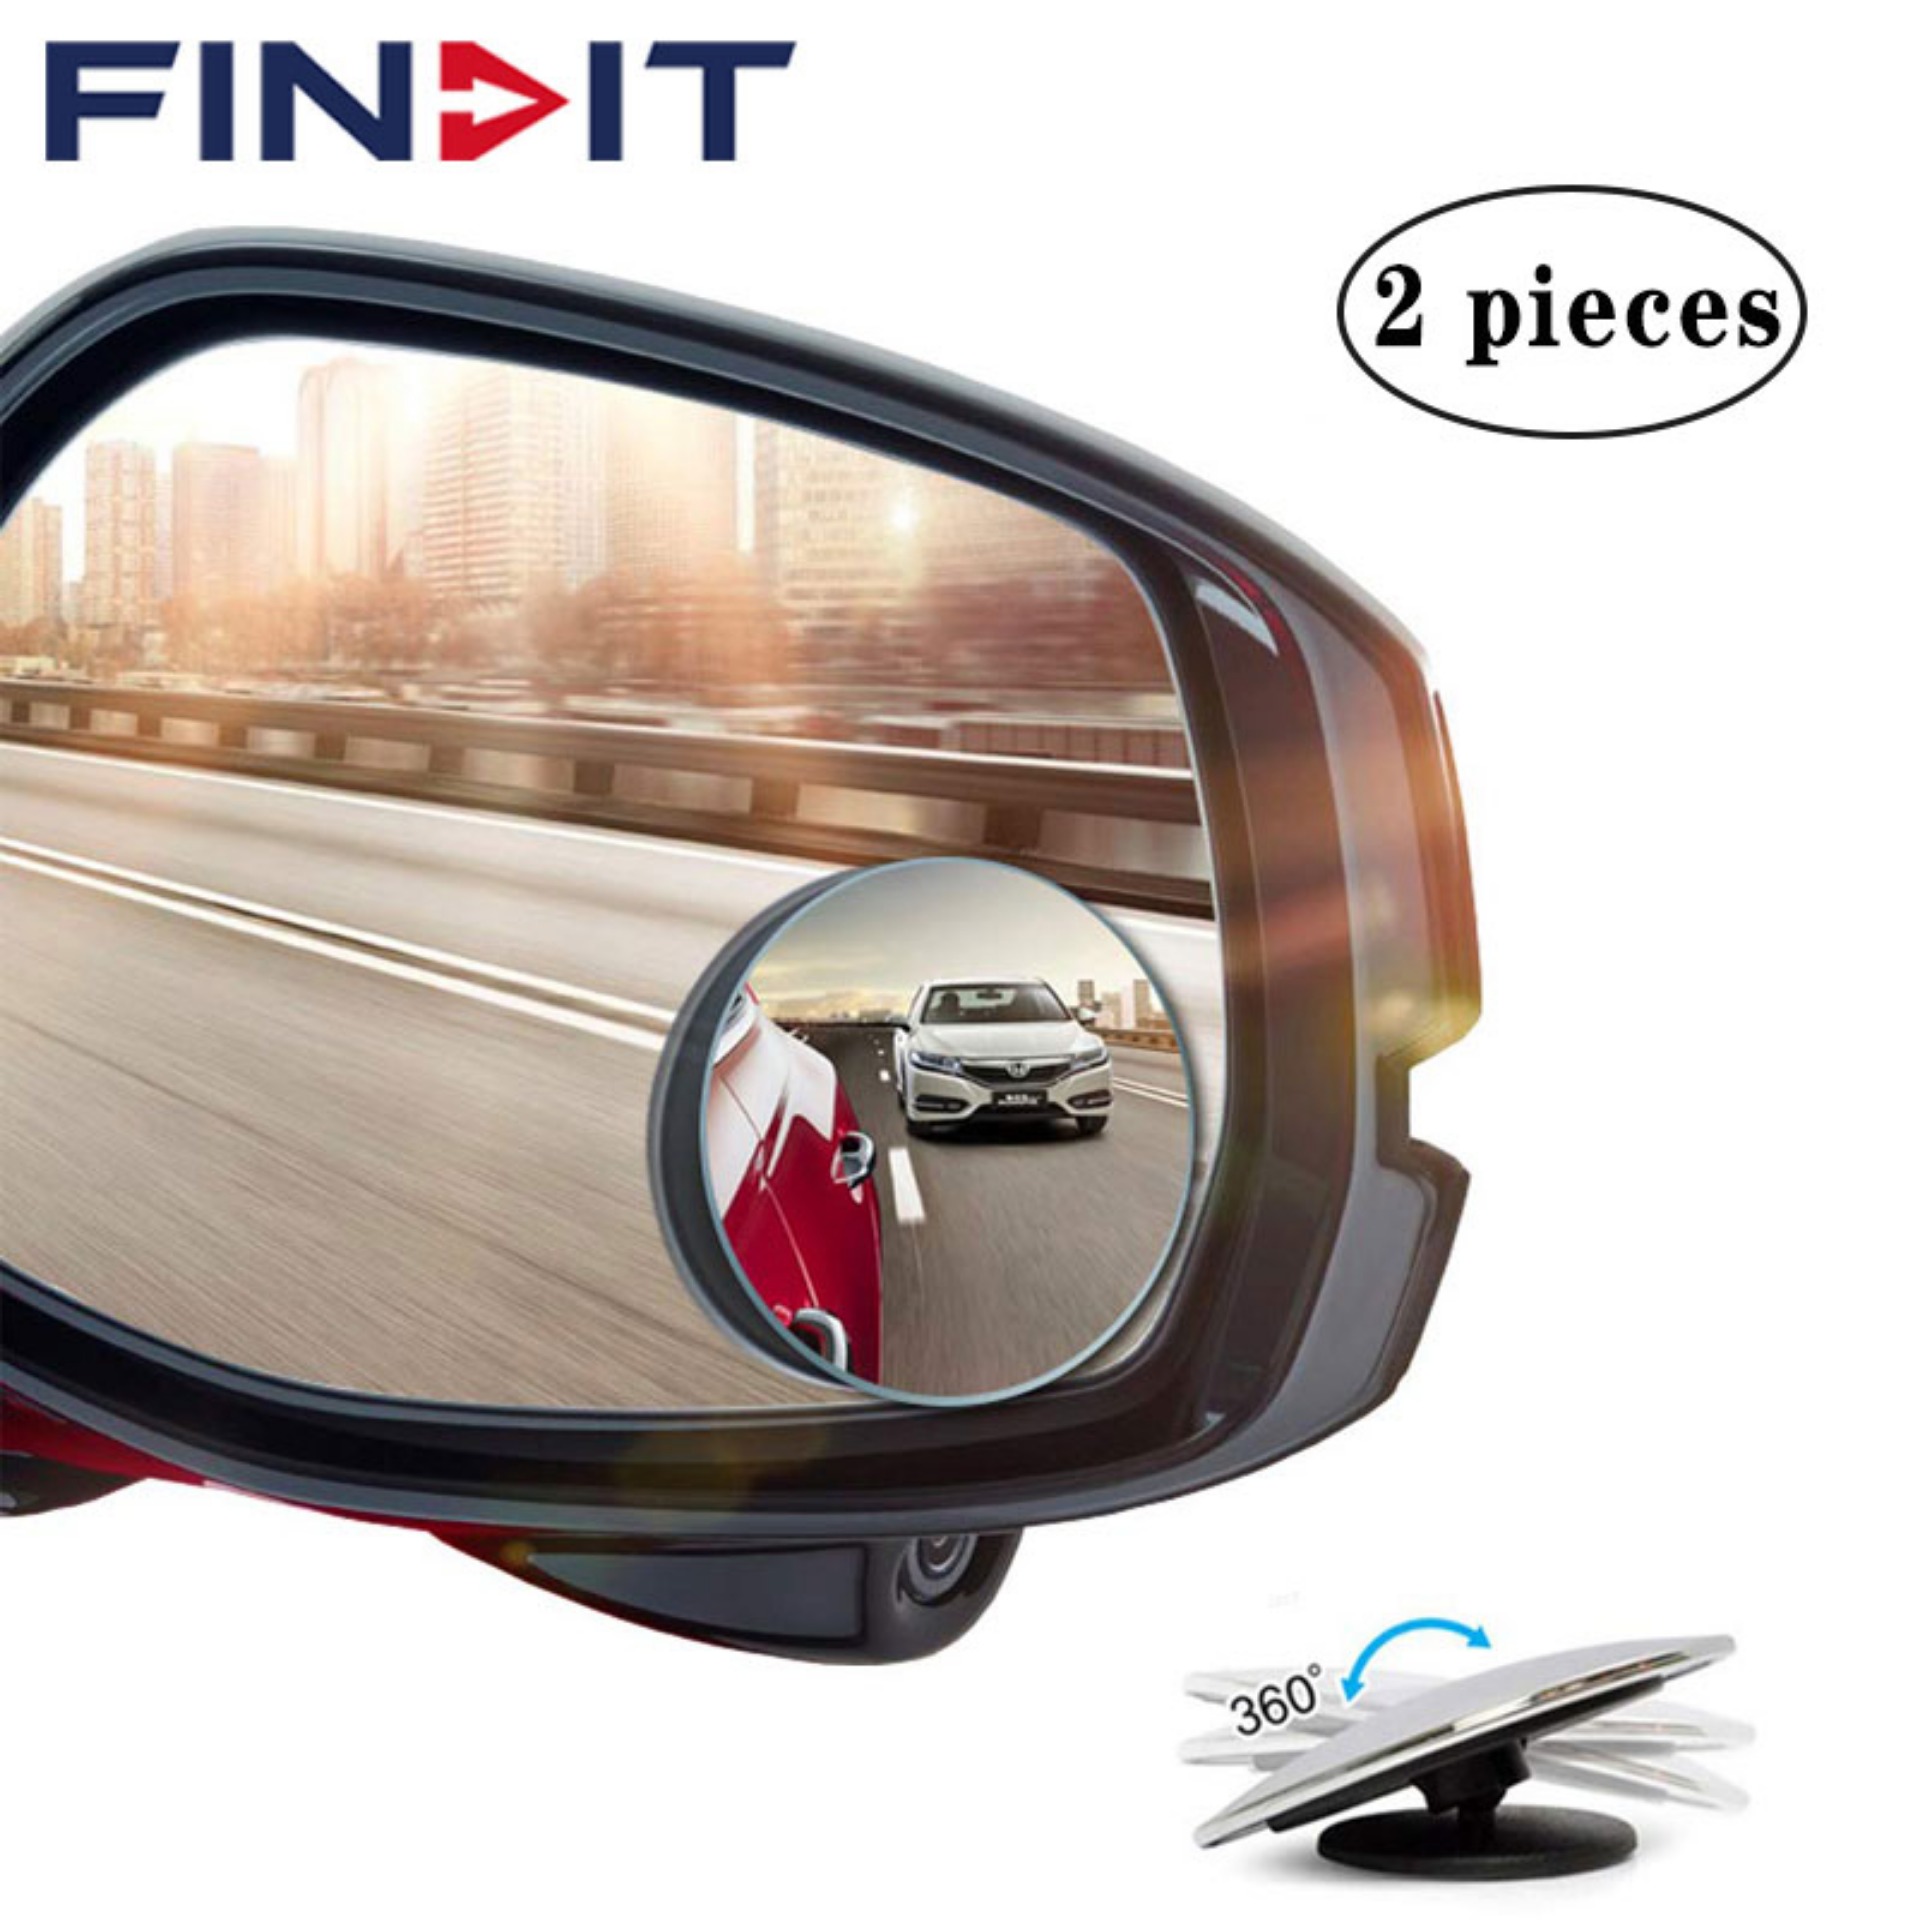 Tesion Fan-Shaped Automobile Rear Blind Spot Mirror Automobile Side Mirror Wide Angle Mirror Safety Convex Rearview Mirror Suitable for Car Truck SUV RV and Van 360 Degree Rotating Design 4 Pcs